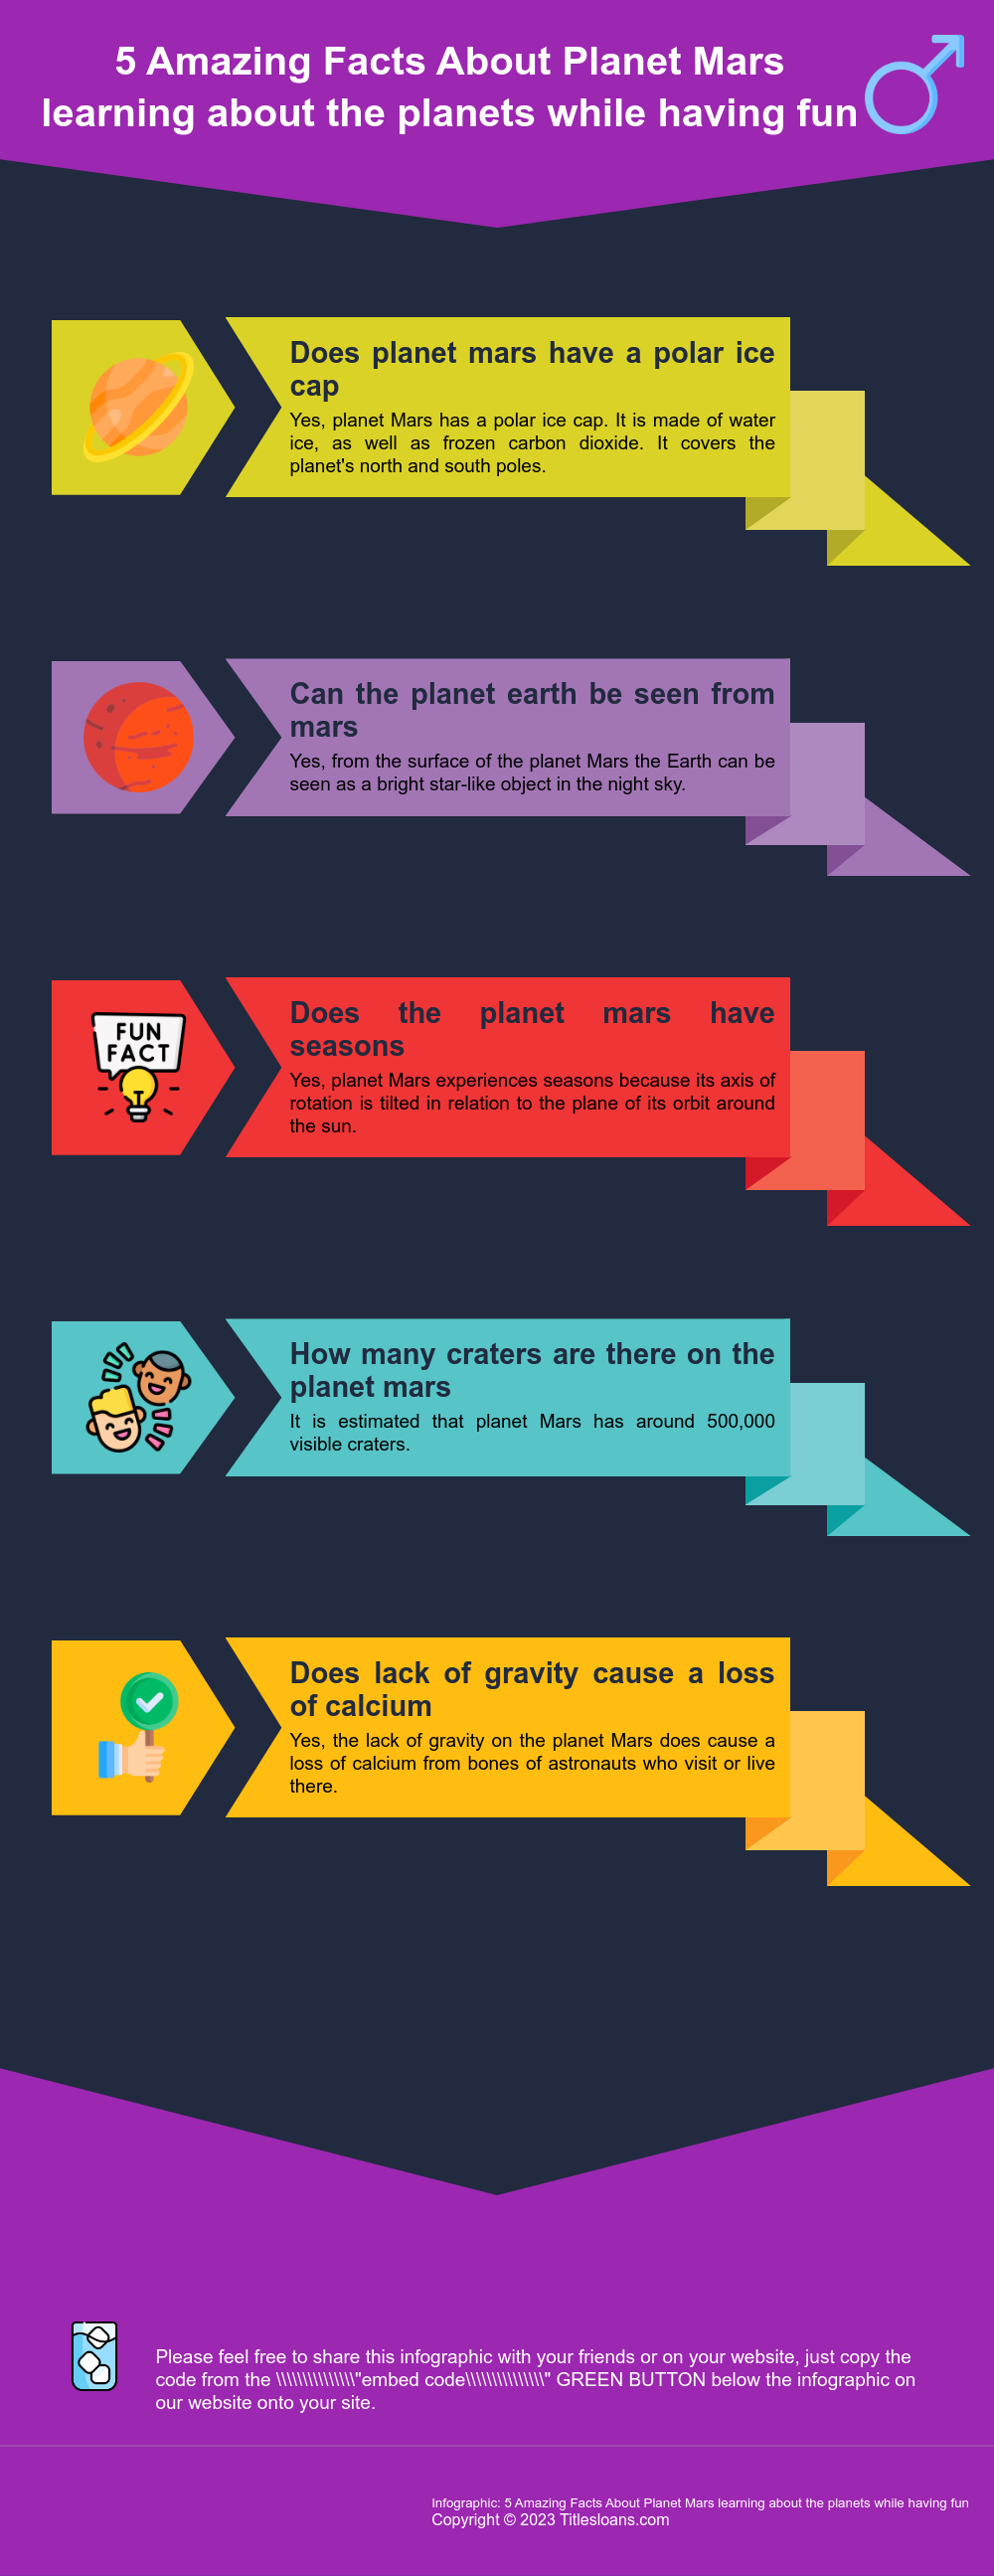 Infographic: 5 Amazing Facts About Planet Mars learning about the planets while having fun